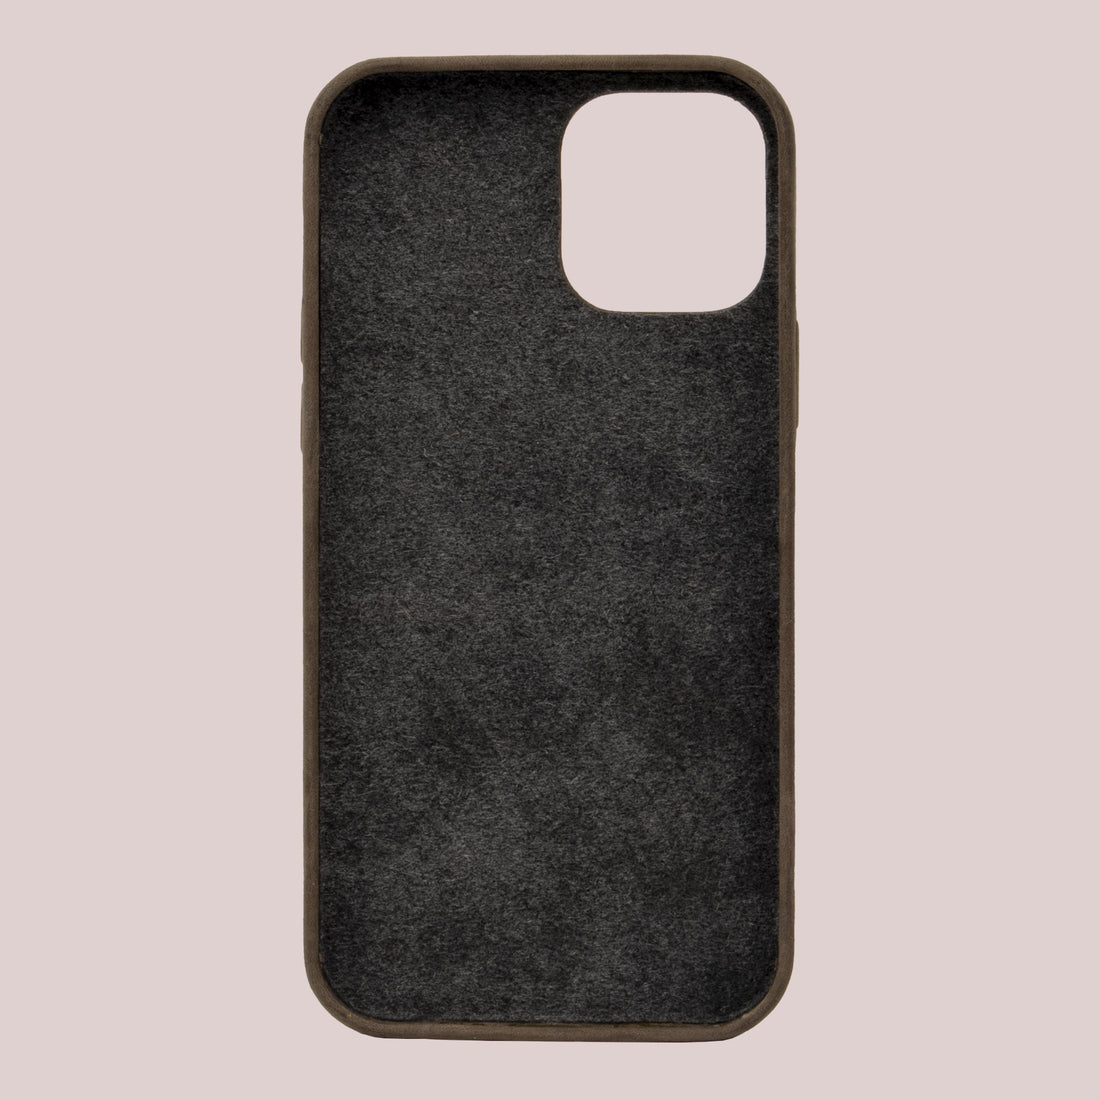 Baxter Card Case for iPhone 13 Mini - Burnt Tobacco